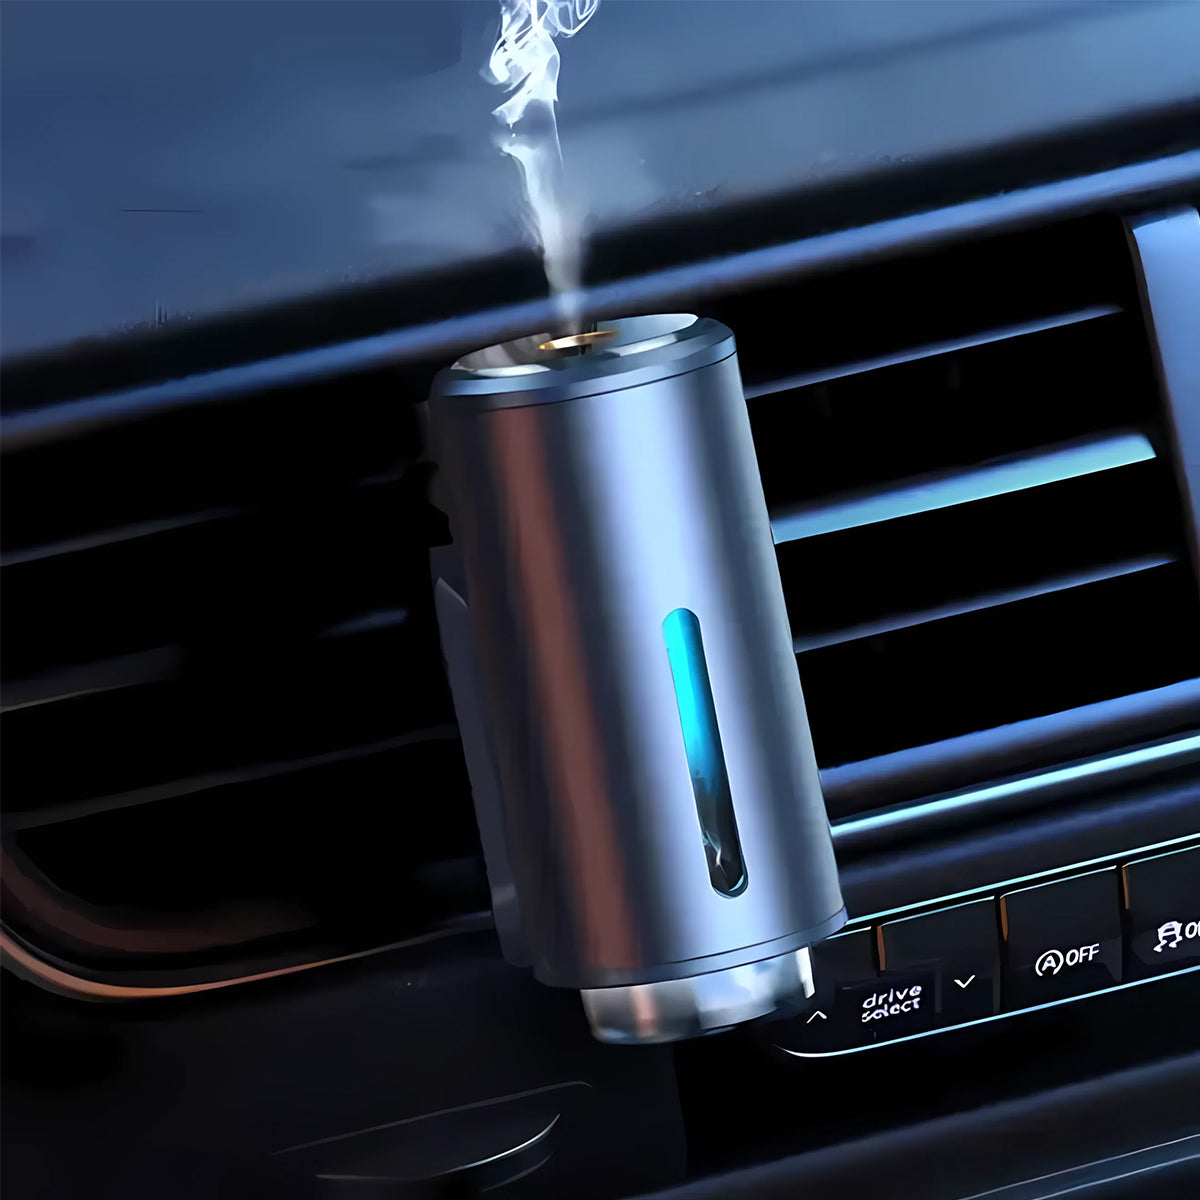 NEW Car Air Freshener With Three Adjustable Intensity levels, Car Aroma Diffuser,3 Bottle Freshener perfume Fragrance-Portable Waterless Car Diffuser Air Freshener Adjust Concentration Scent Car Aromatherapy